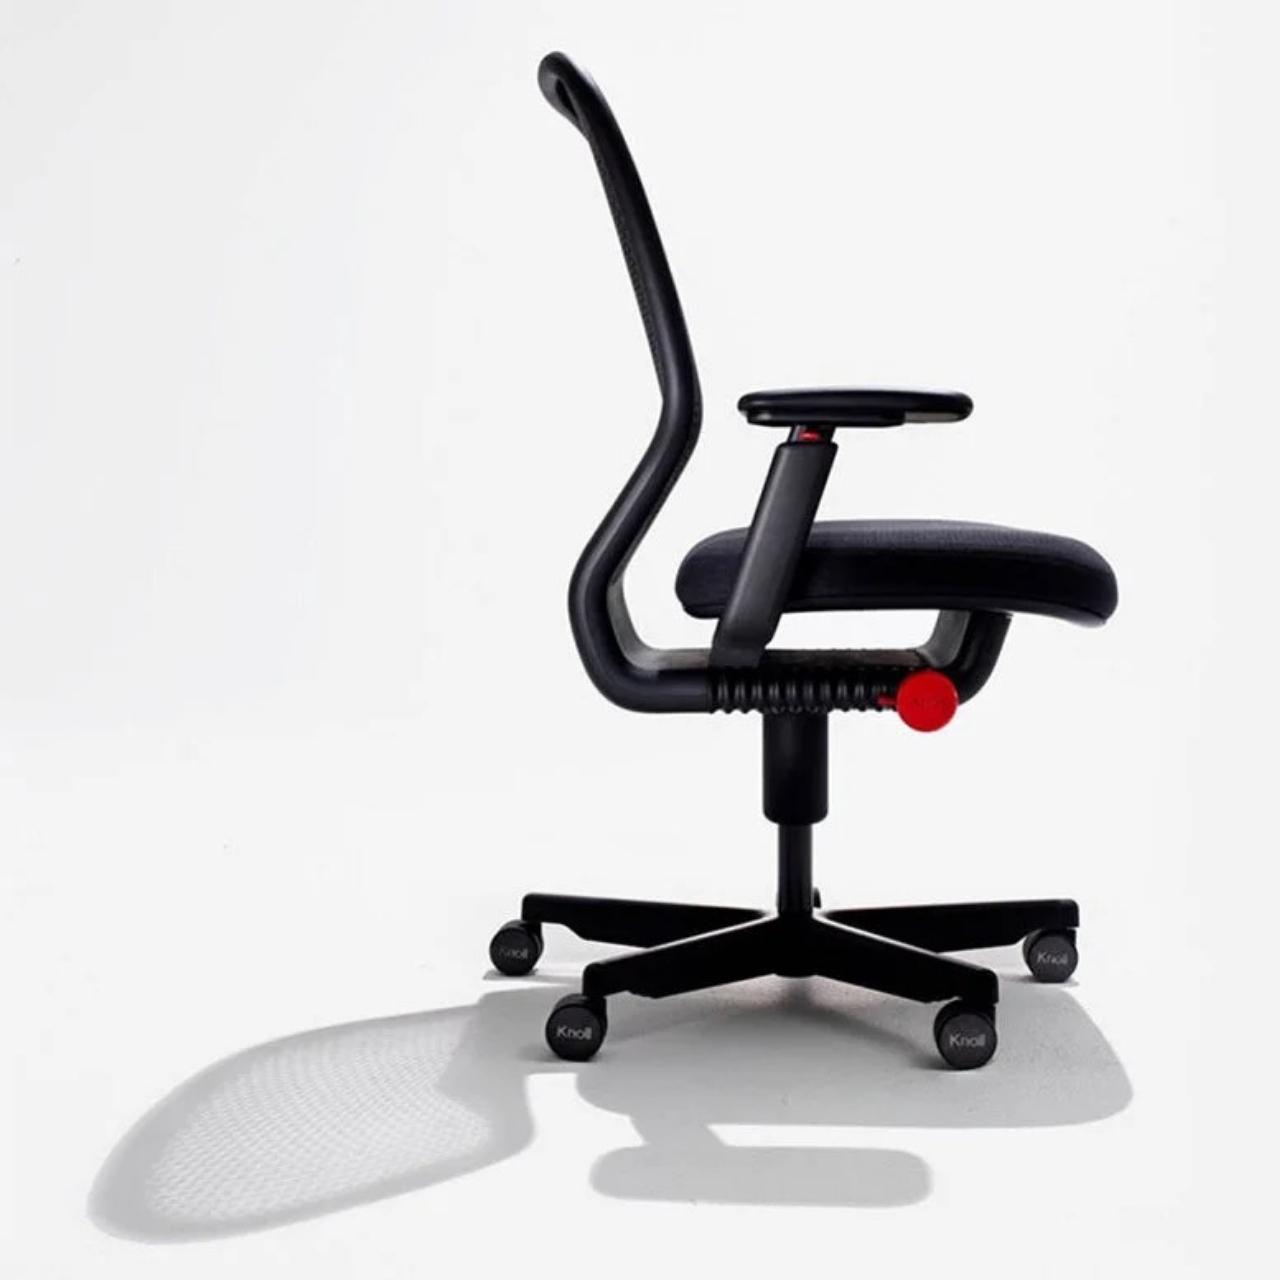 #Marc Newson’s Task chair brings a “floating” seat, perforated back design